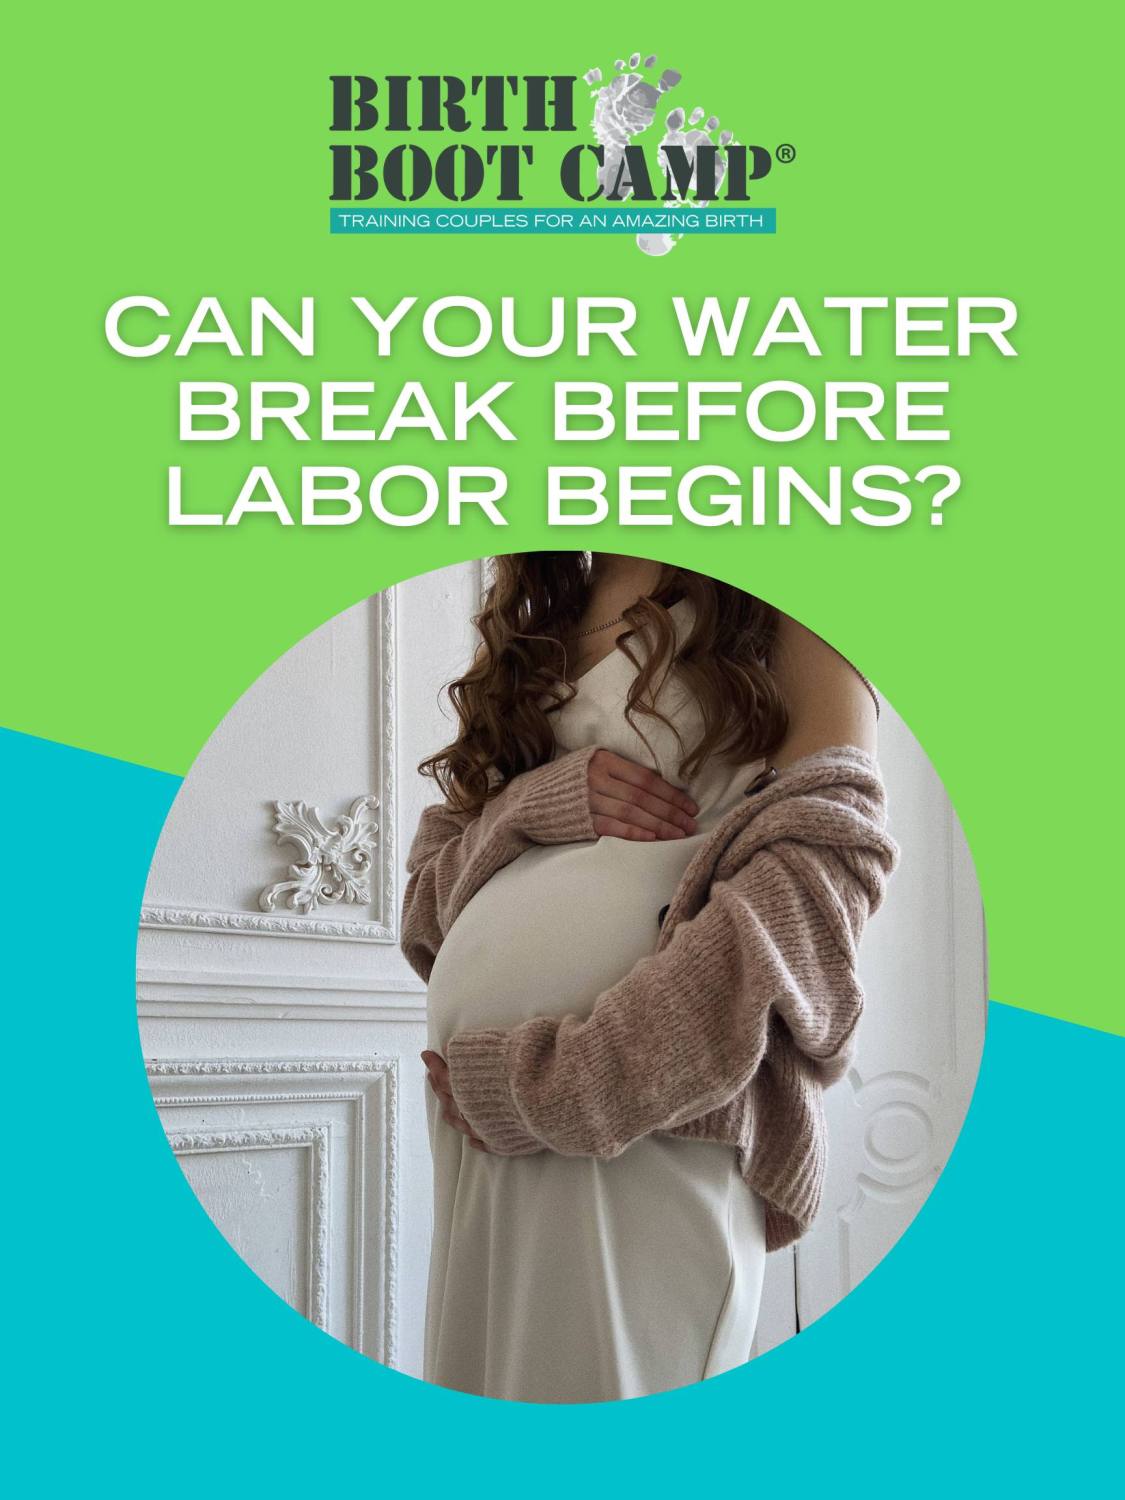 Can your water break before labor begins?